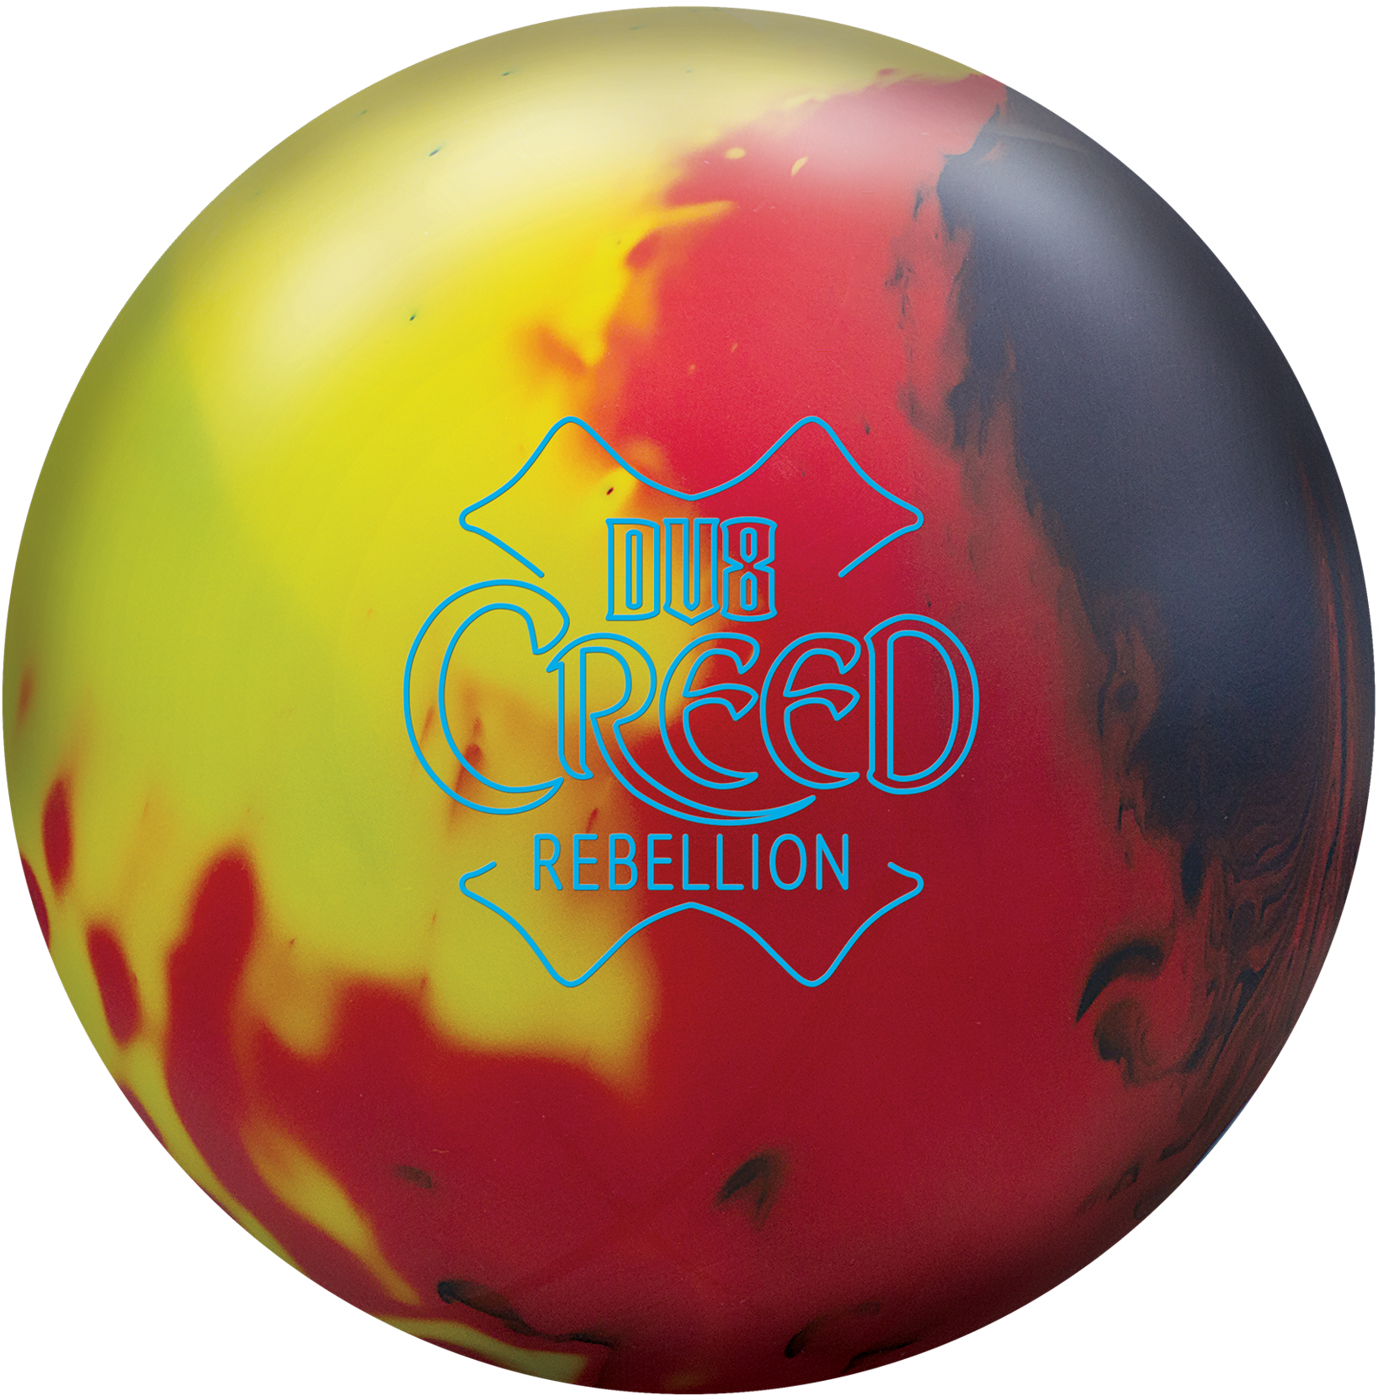 Colorful Bowling Ball Creed Rebellion PNG